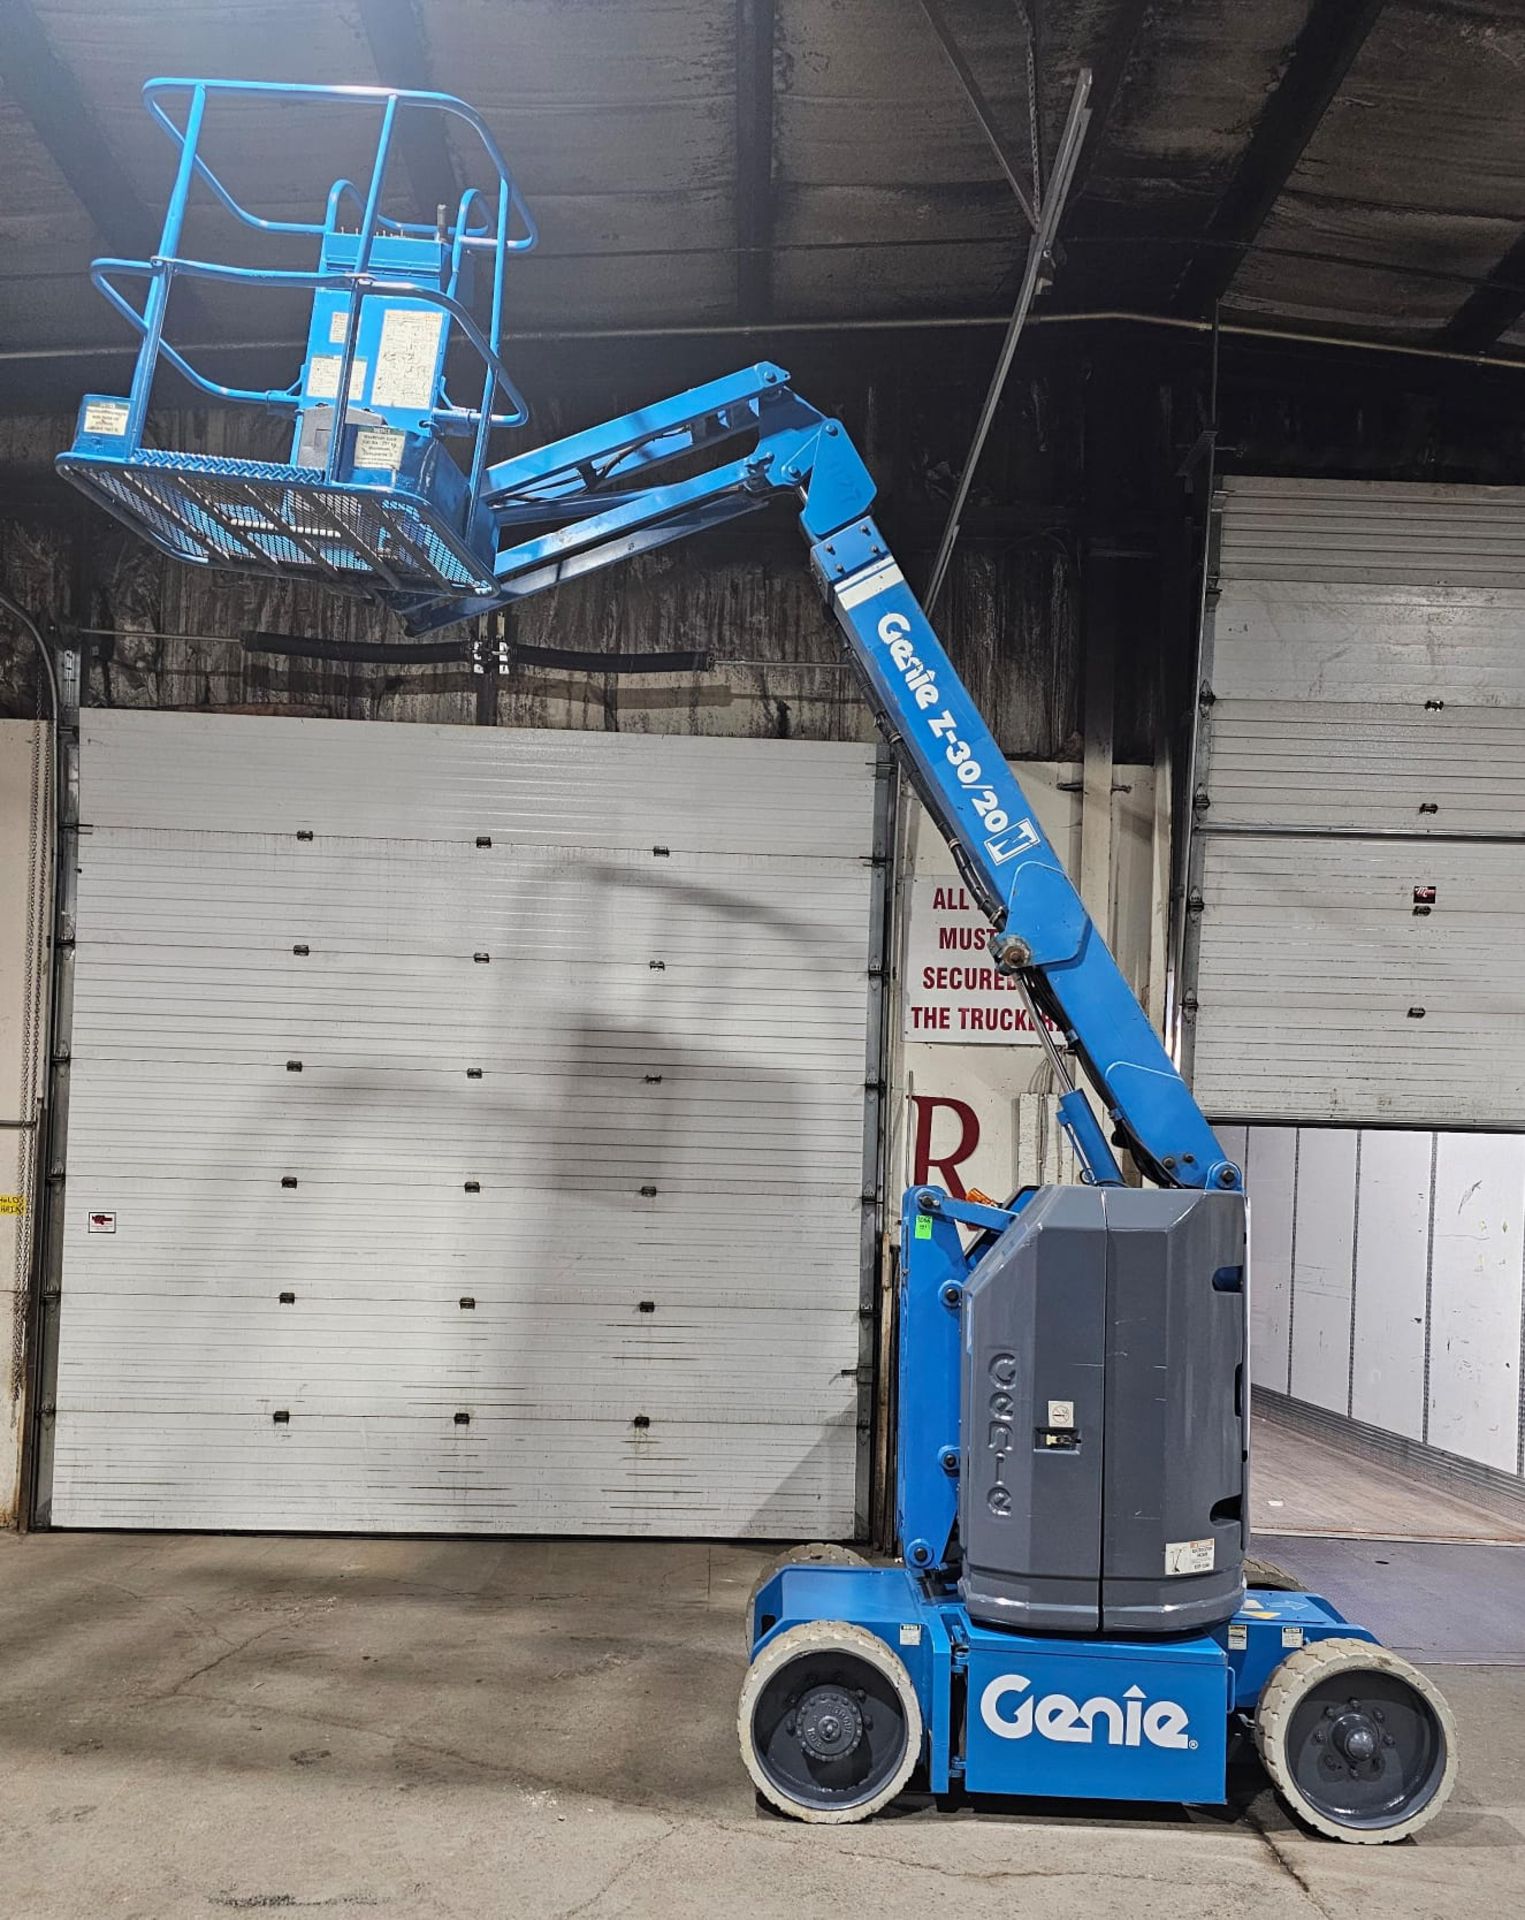 Genie model Z-30-N Zoom Boom Electric Motorized Man Lift 30' Height & 21' Reach - with 24V Battery - Image 10 of 10